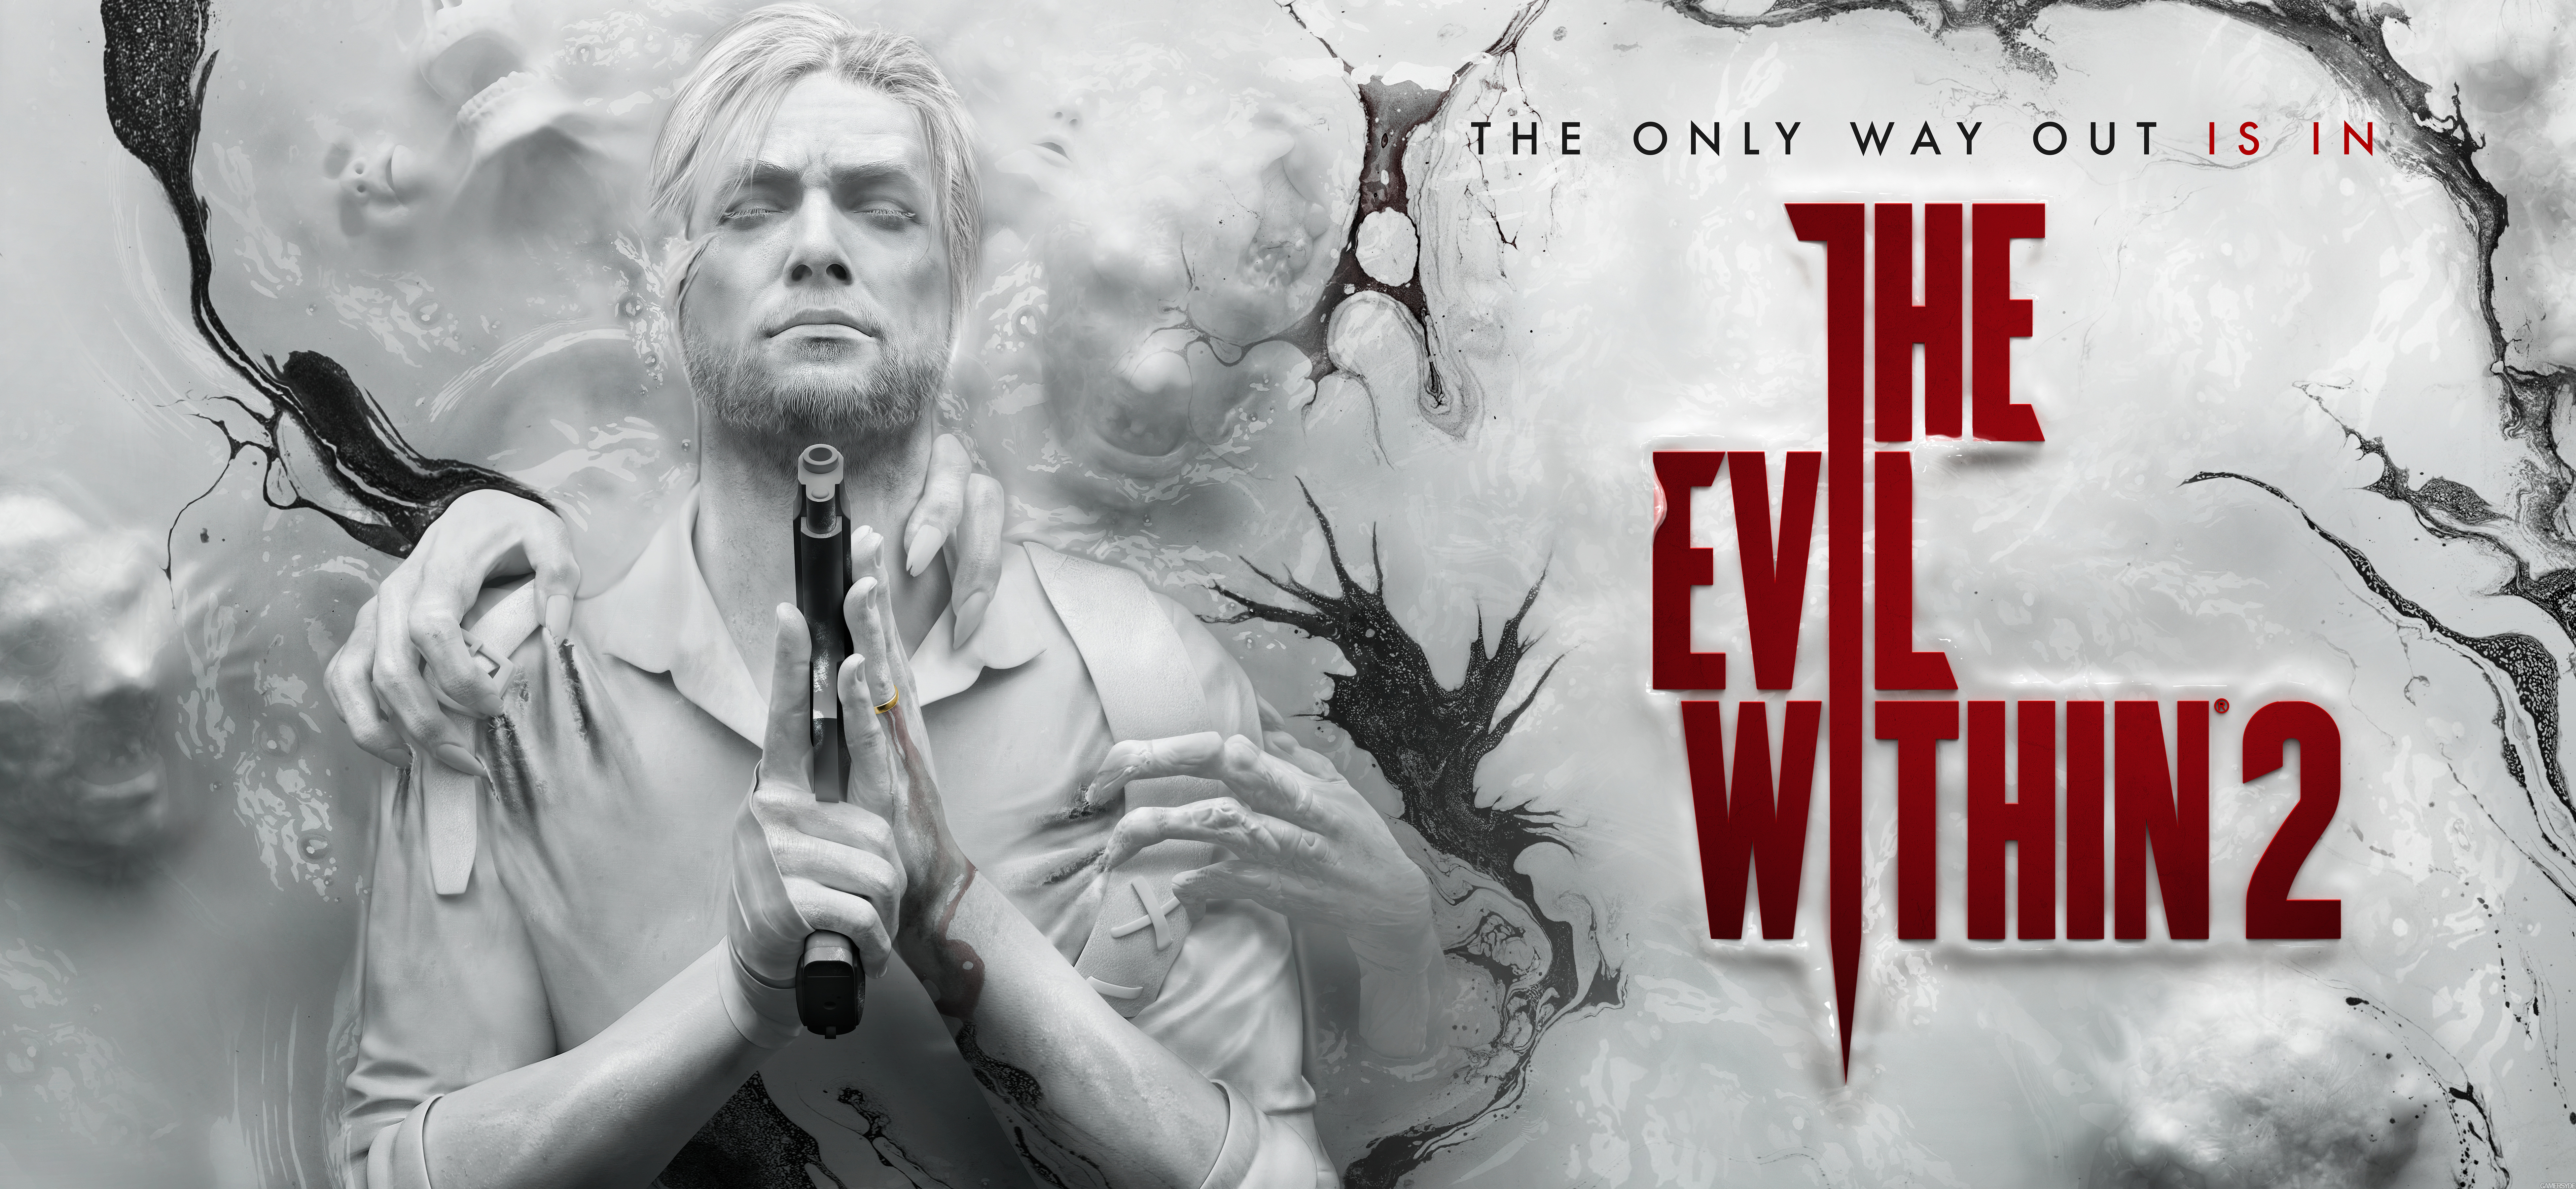 image_the_evil_within_2-35706-3886_0002.